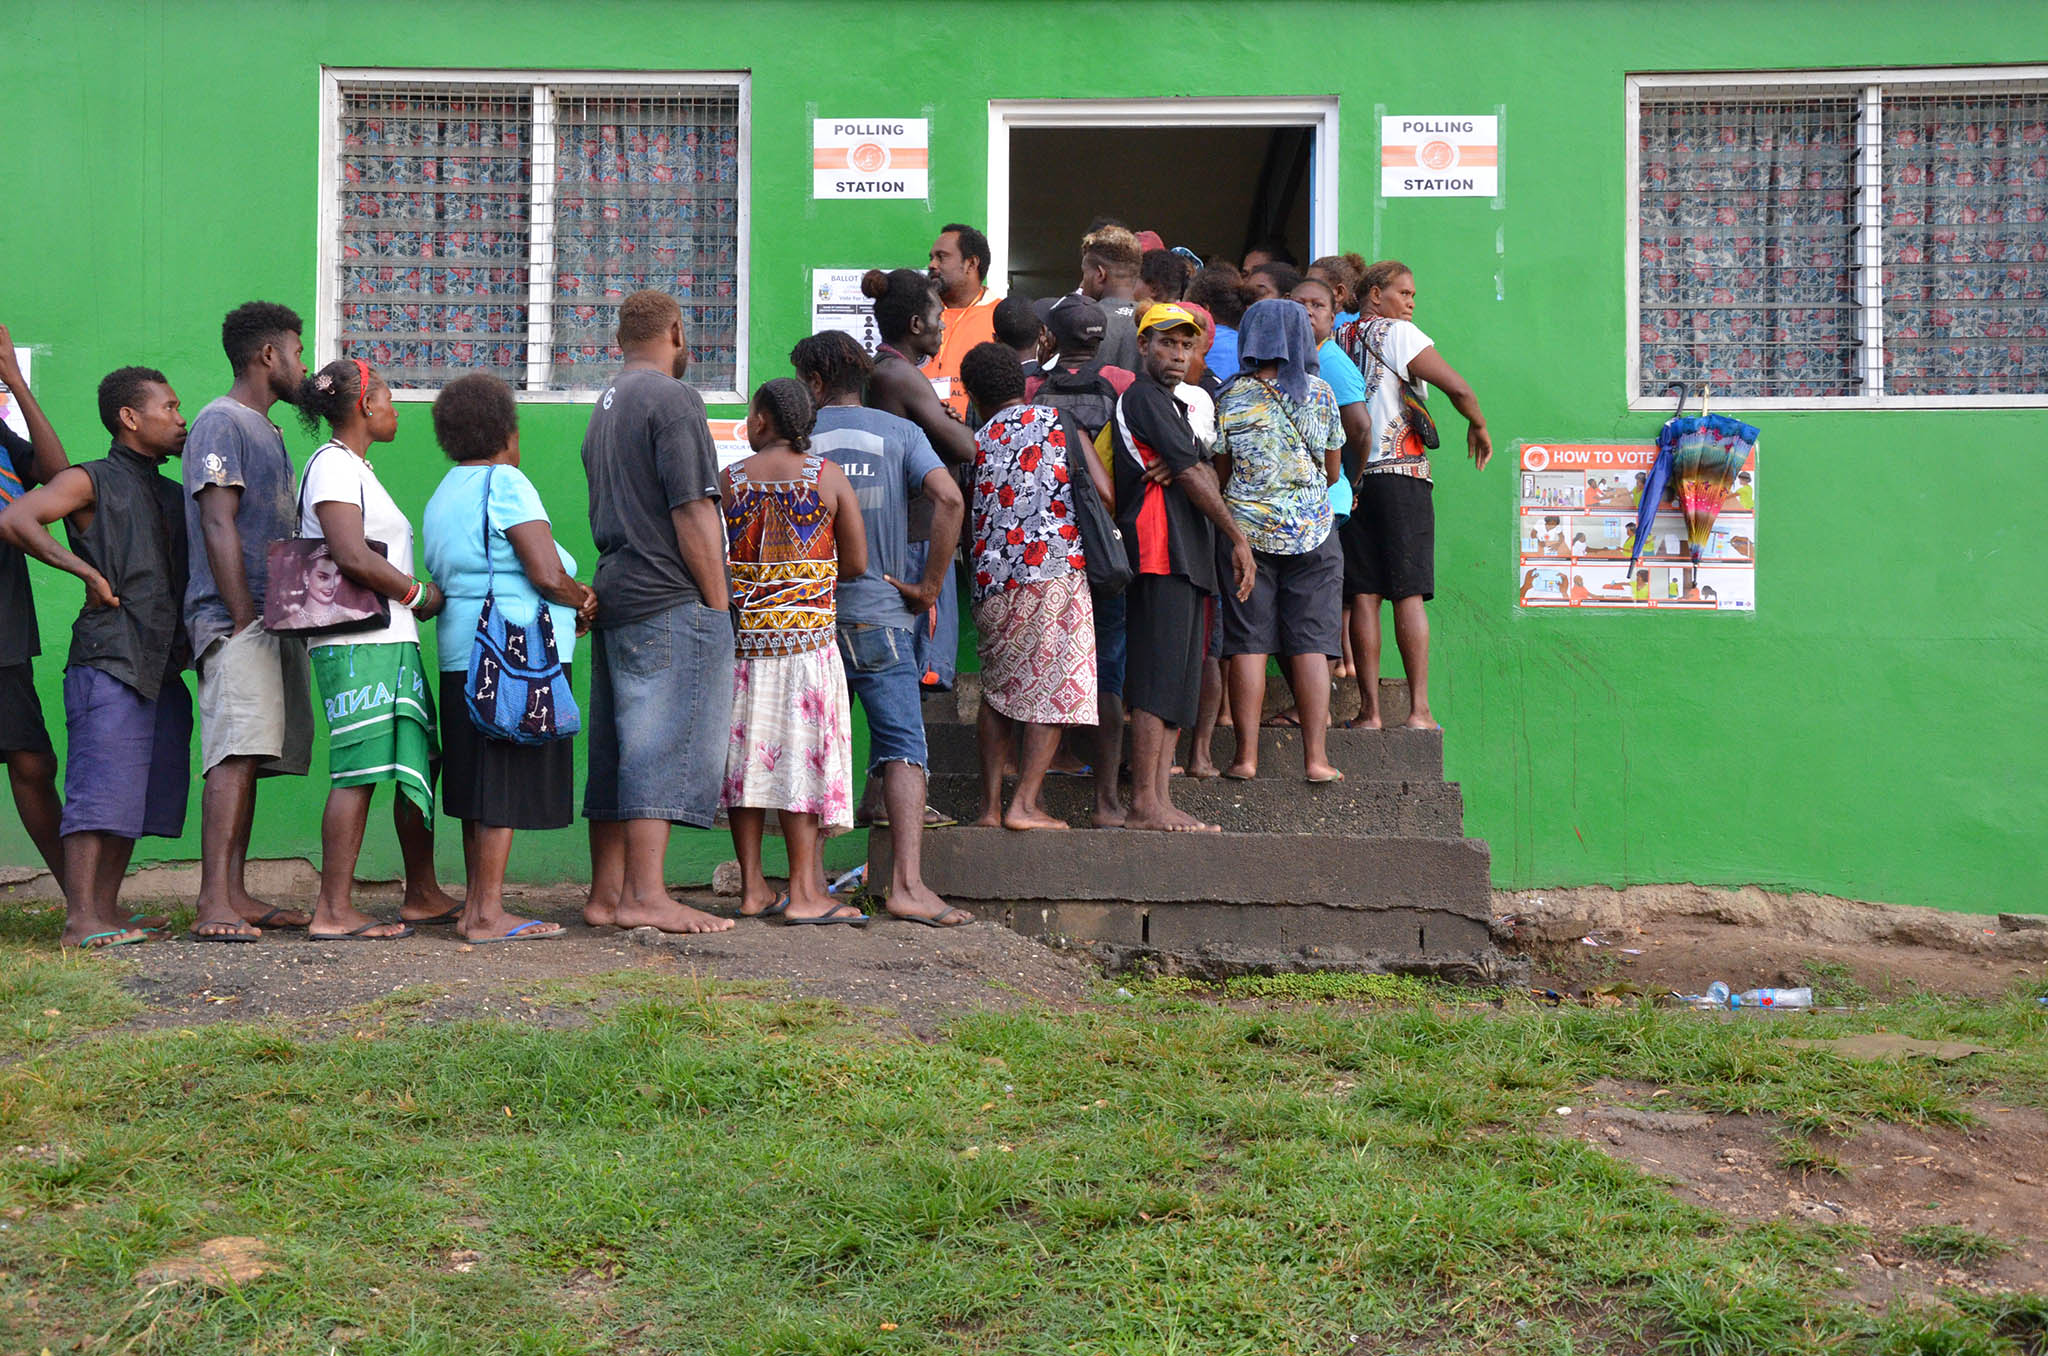 Voters in Solomon Islands wait outside a polling location during the 2019 elections. April 2, 2019. (Commonwealth Secretariat/Flickr)